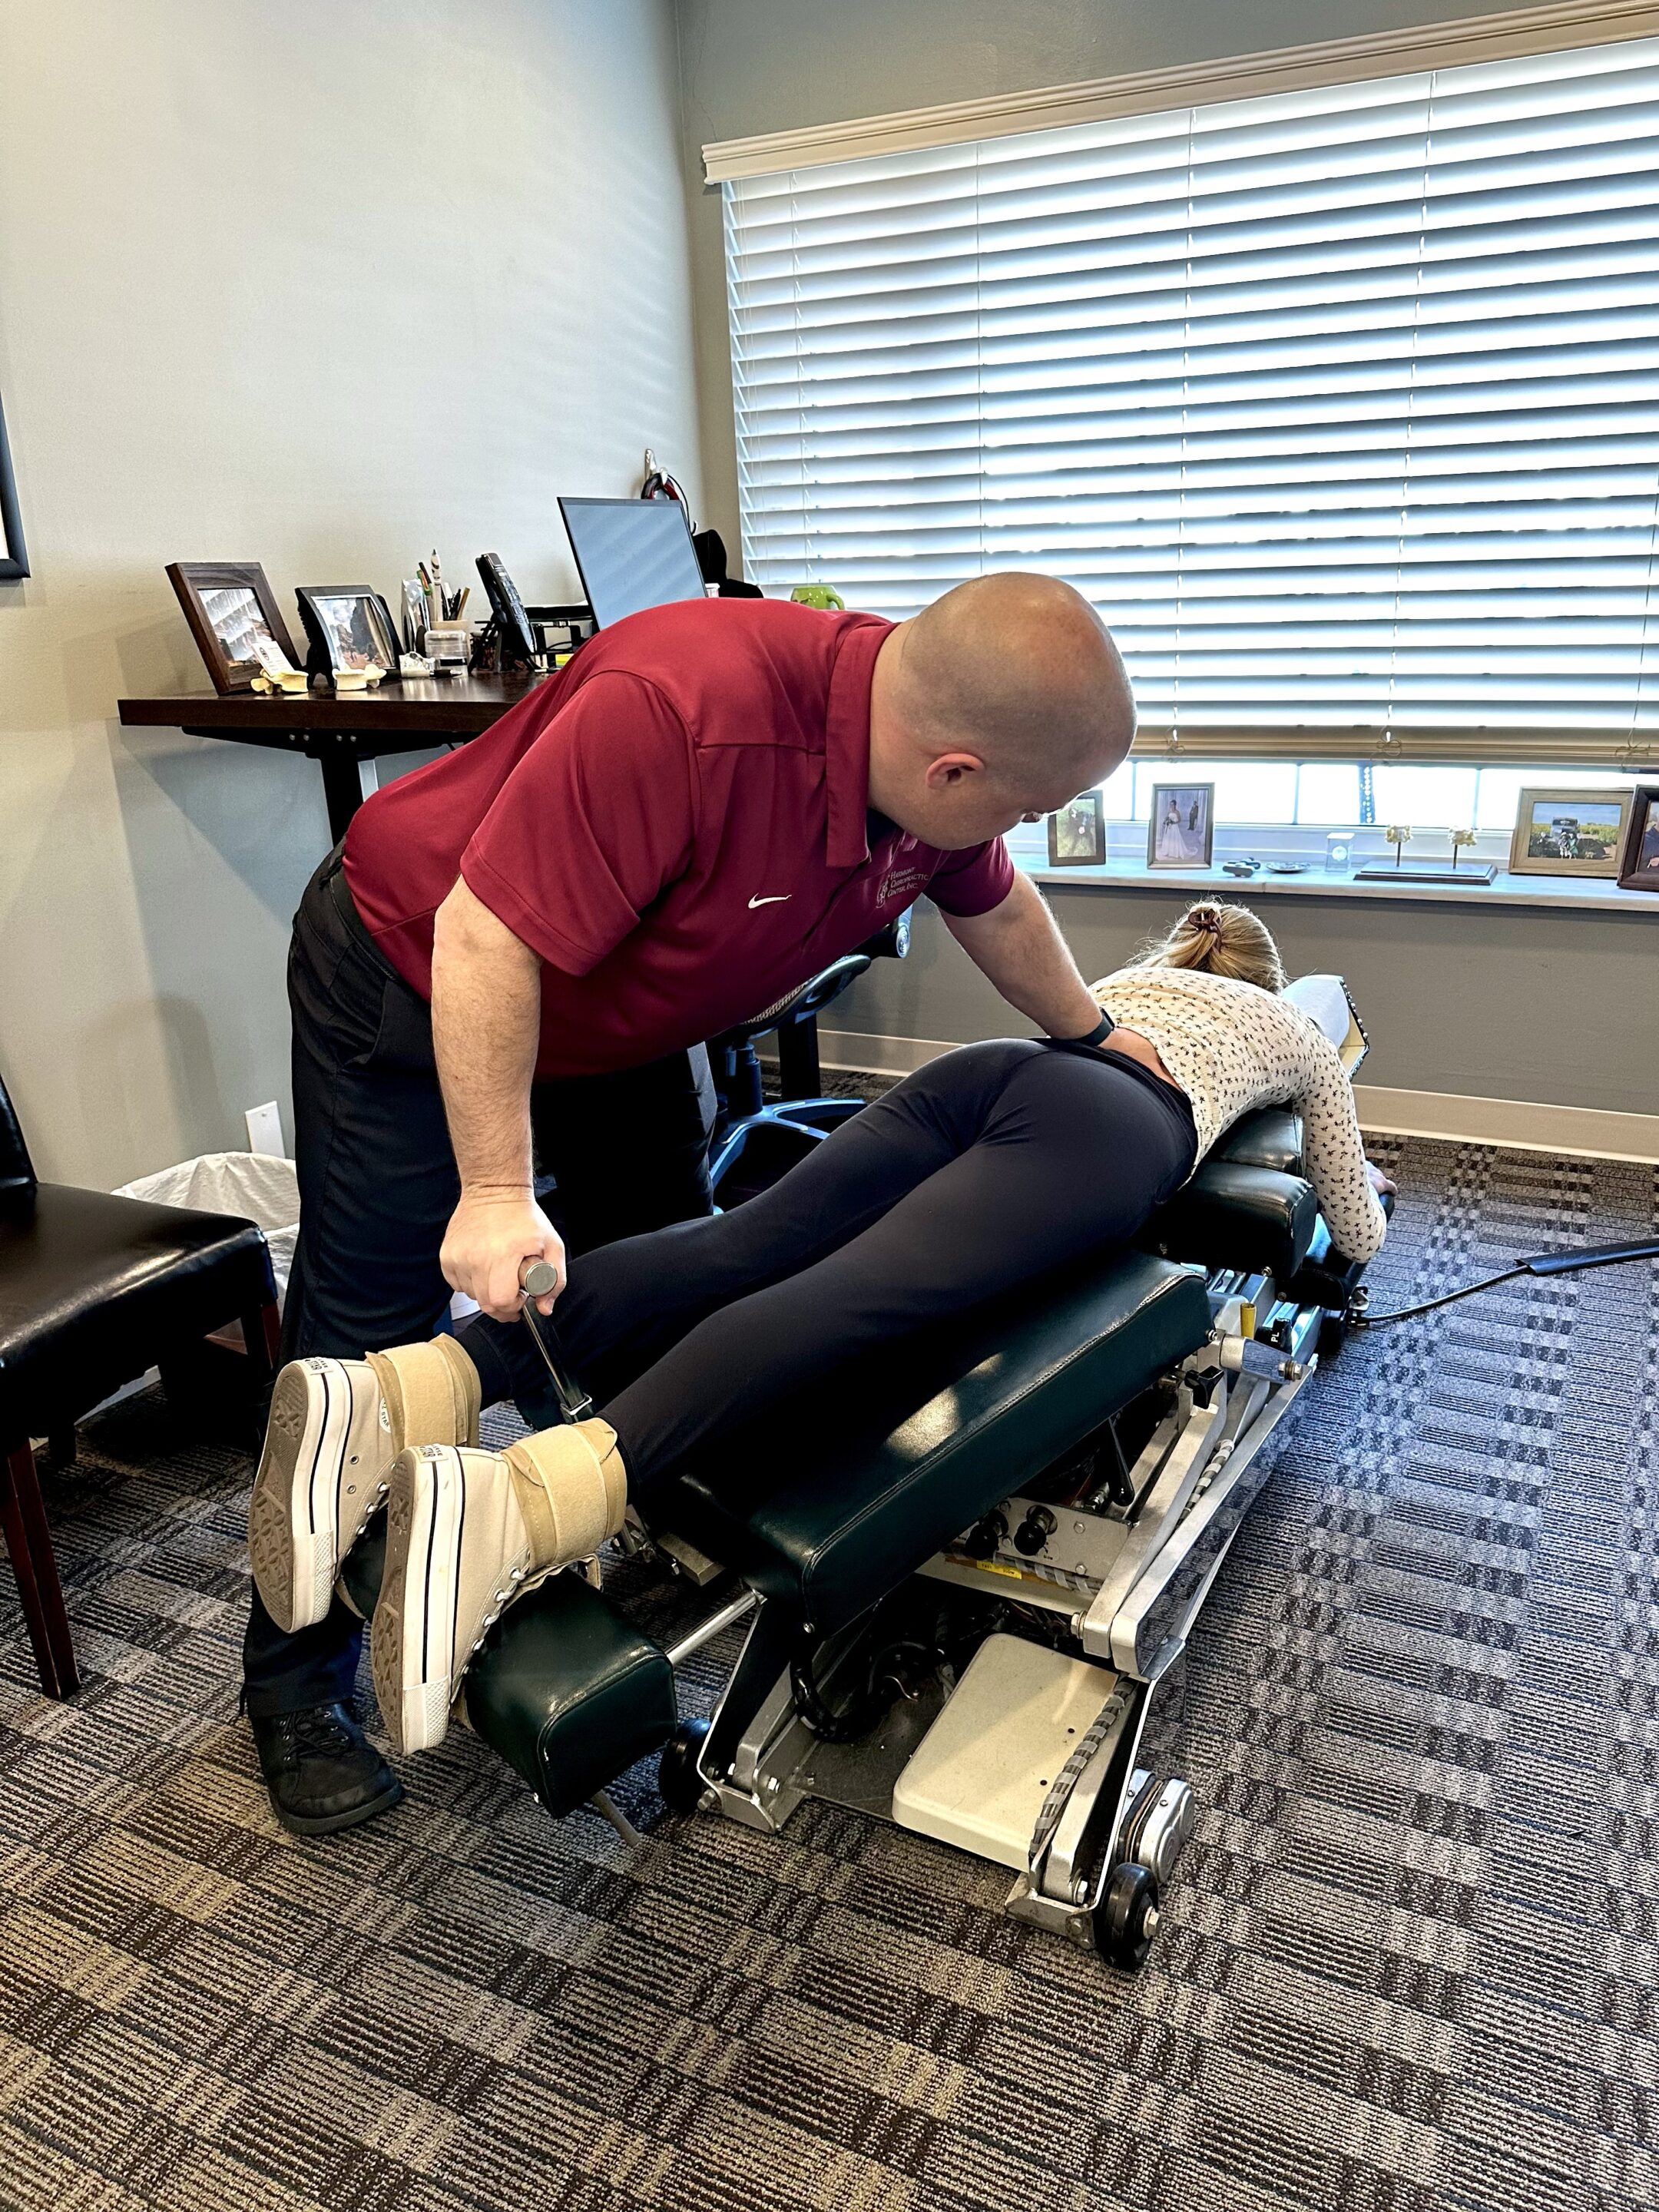 Flexion distraction therapy